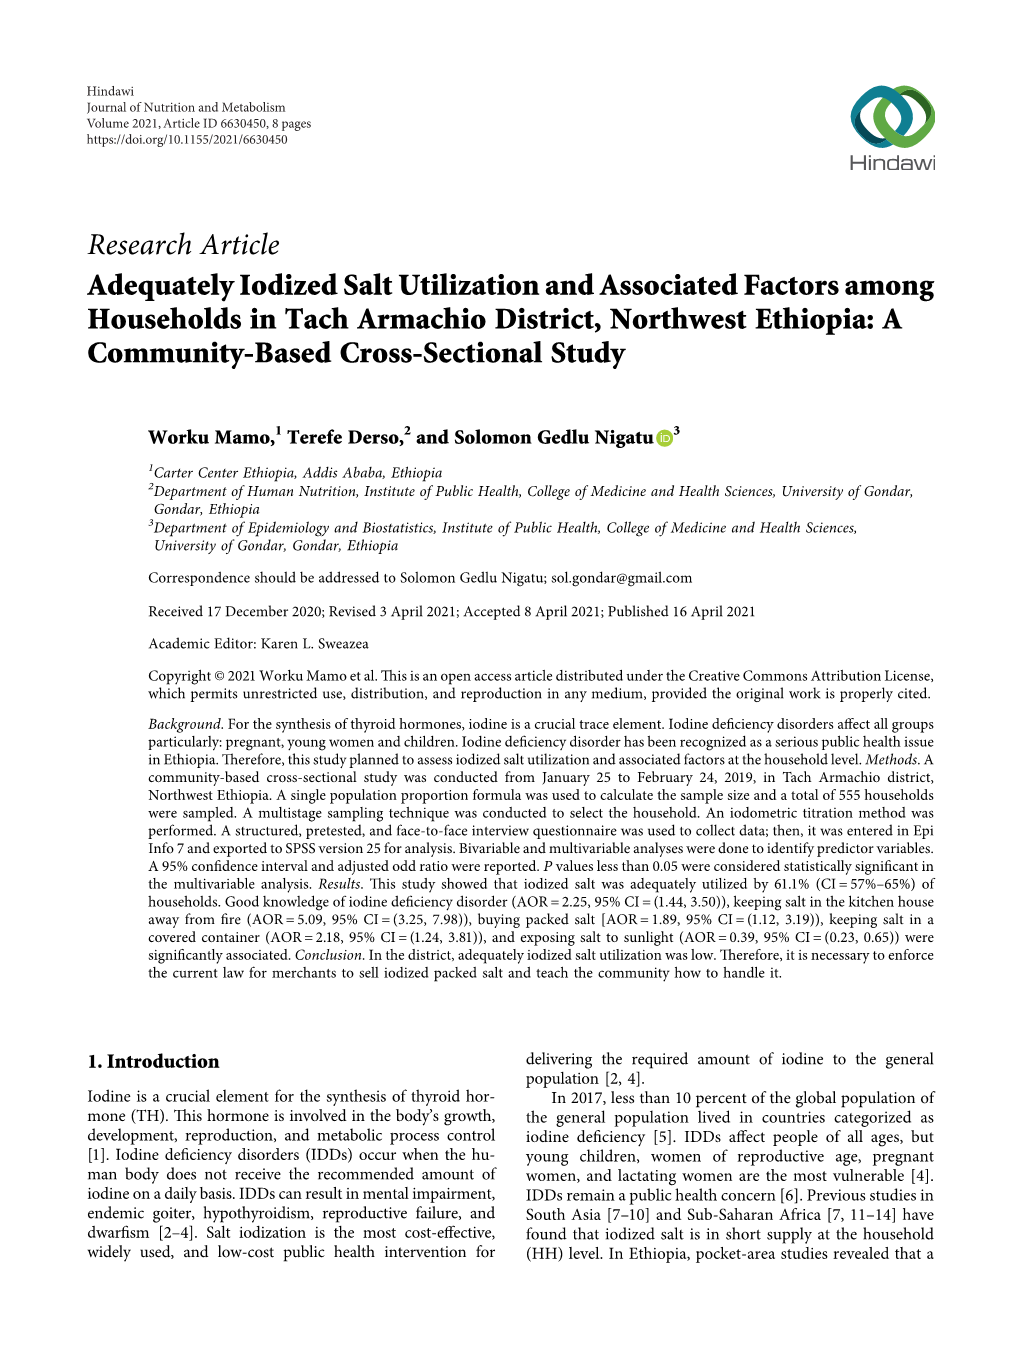 Adequately Iodized Salt Utilization and Associated Factors Among Households in Tach Armachio District, Northwest Ethiopia: a Community-Based Cross-Sectional Study